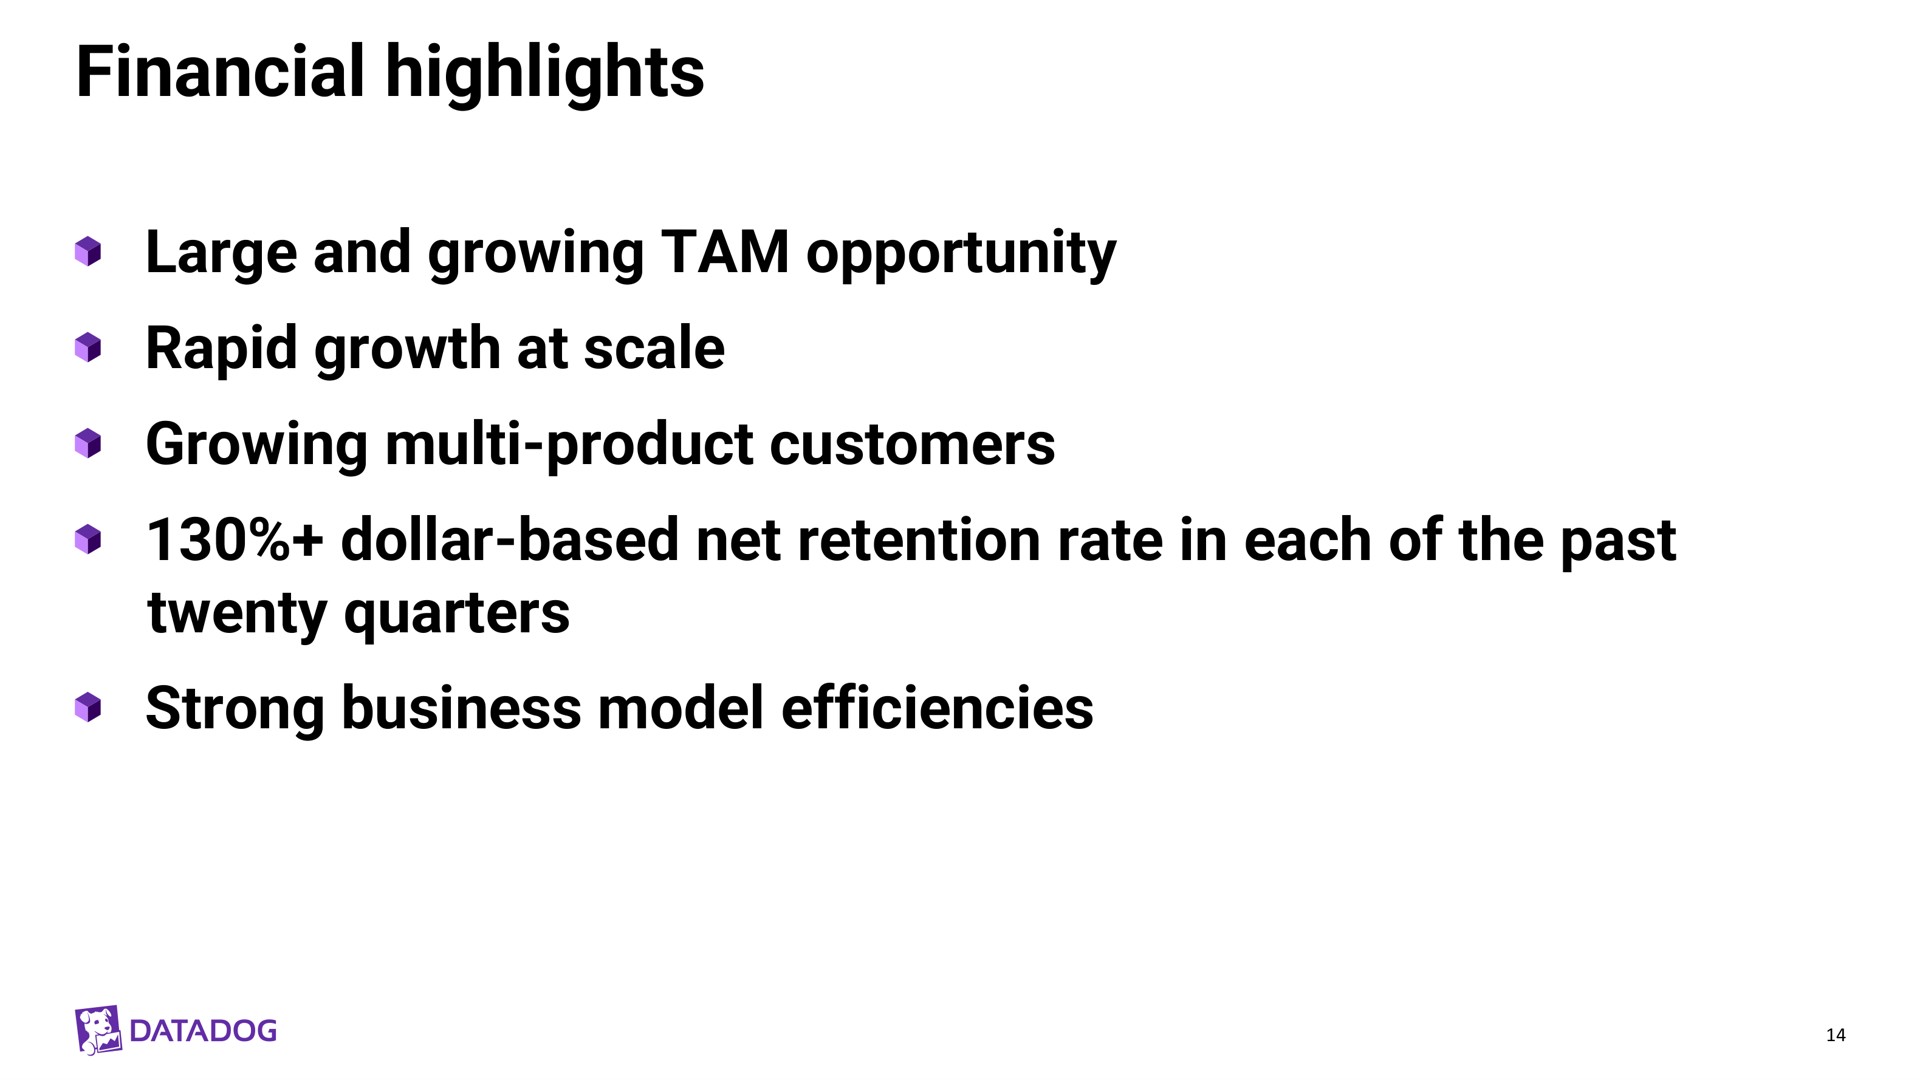 financial highlights large and growing tam opportunity rapid growth at scale growing product customers dollar based net retention rate in each of the past twenty quarters strong business model efficiencies | Datadog